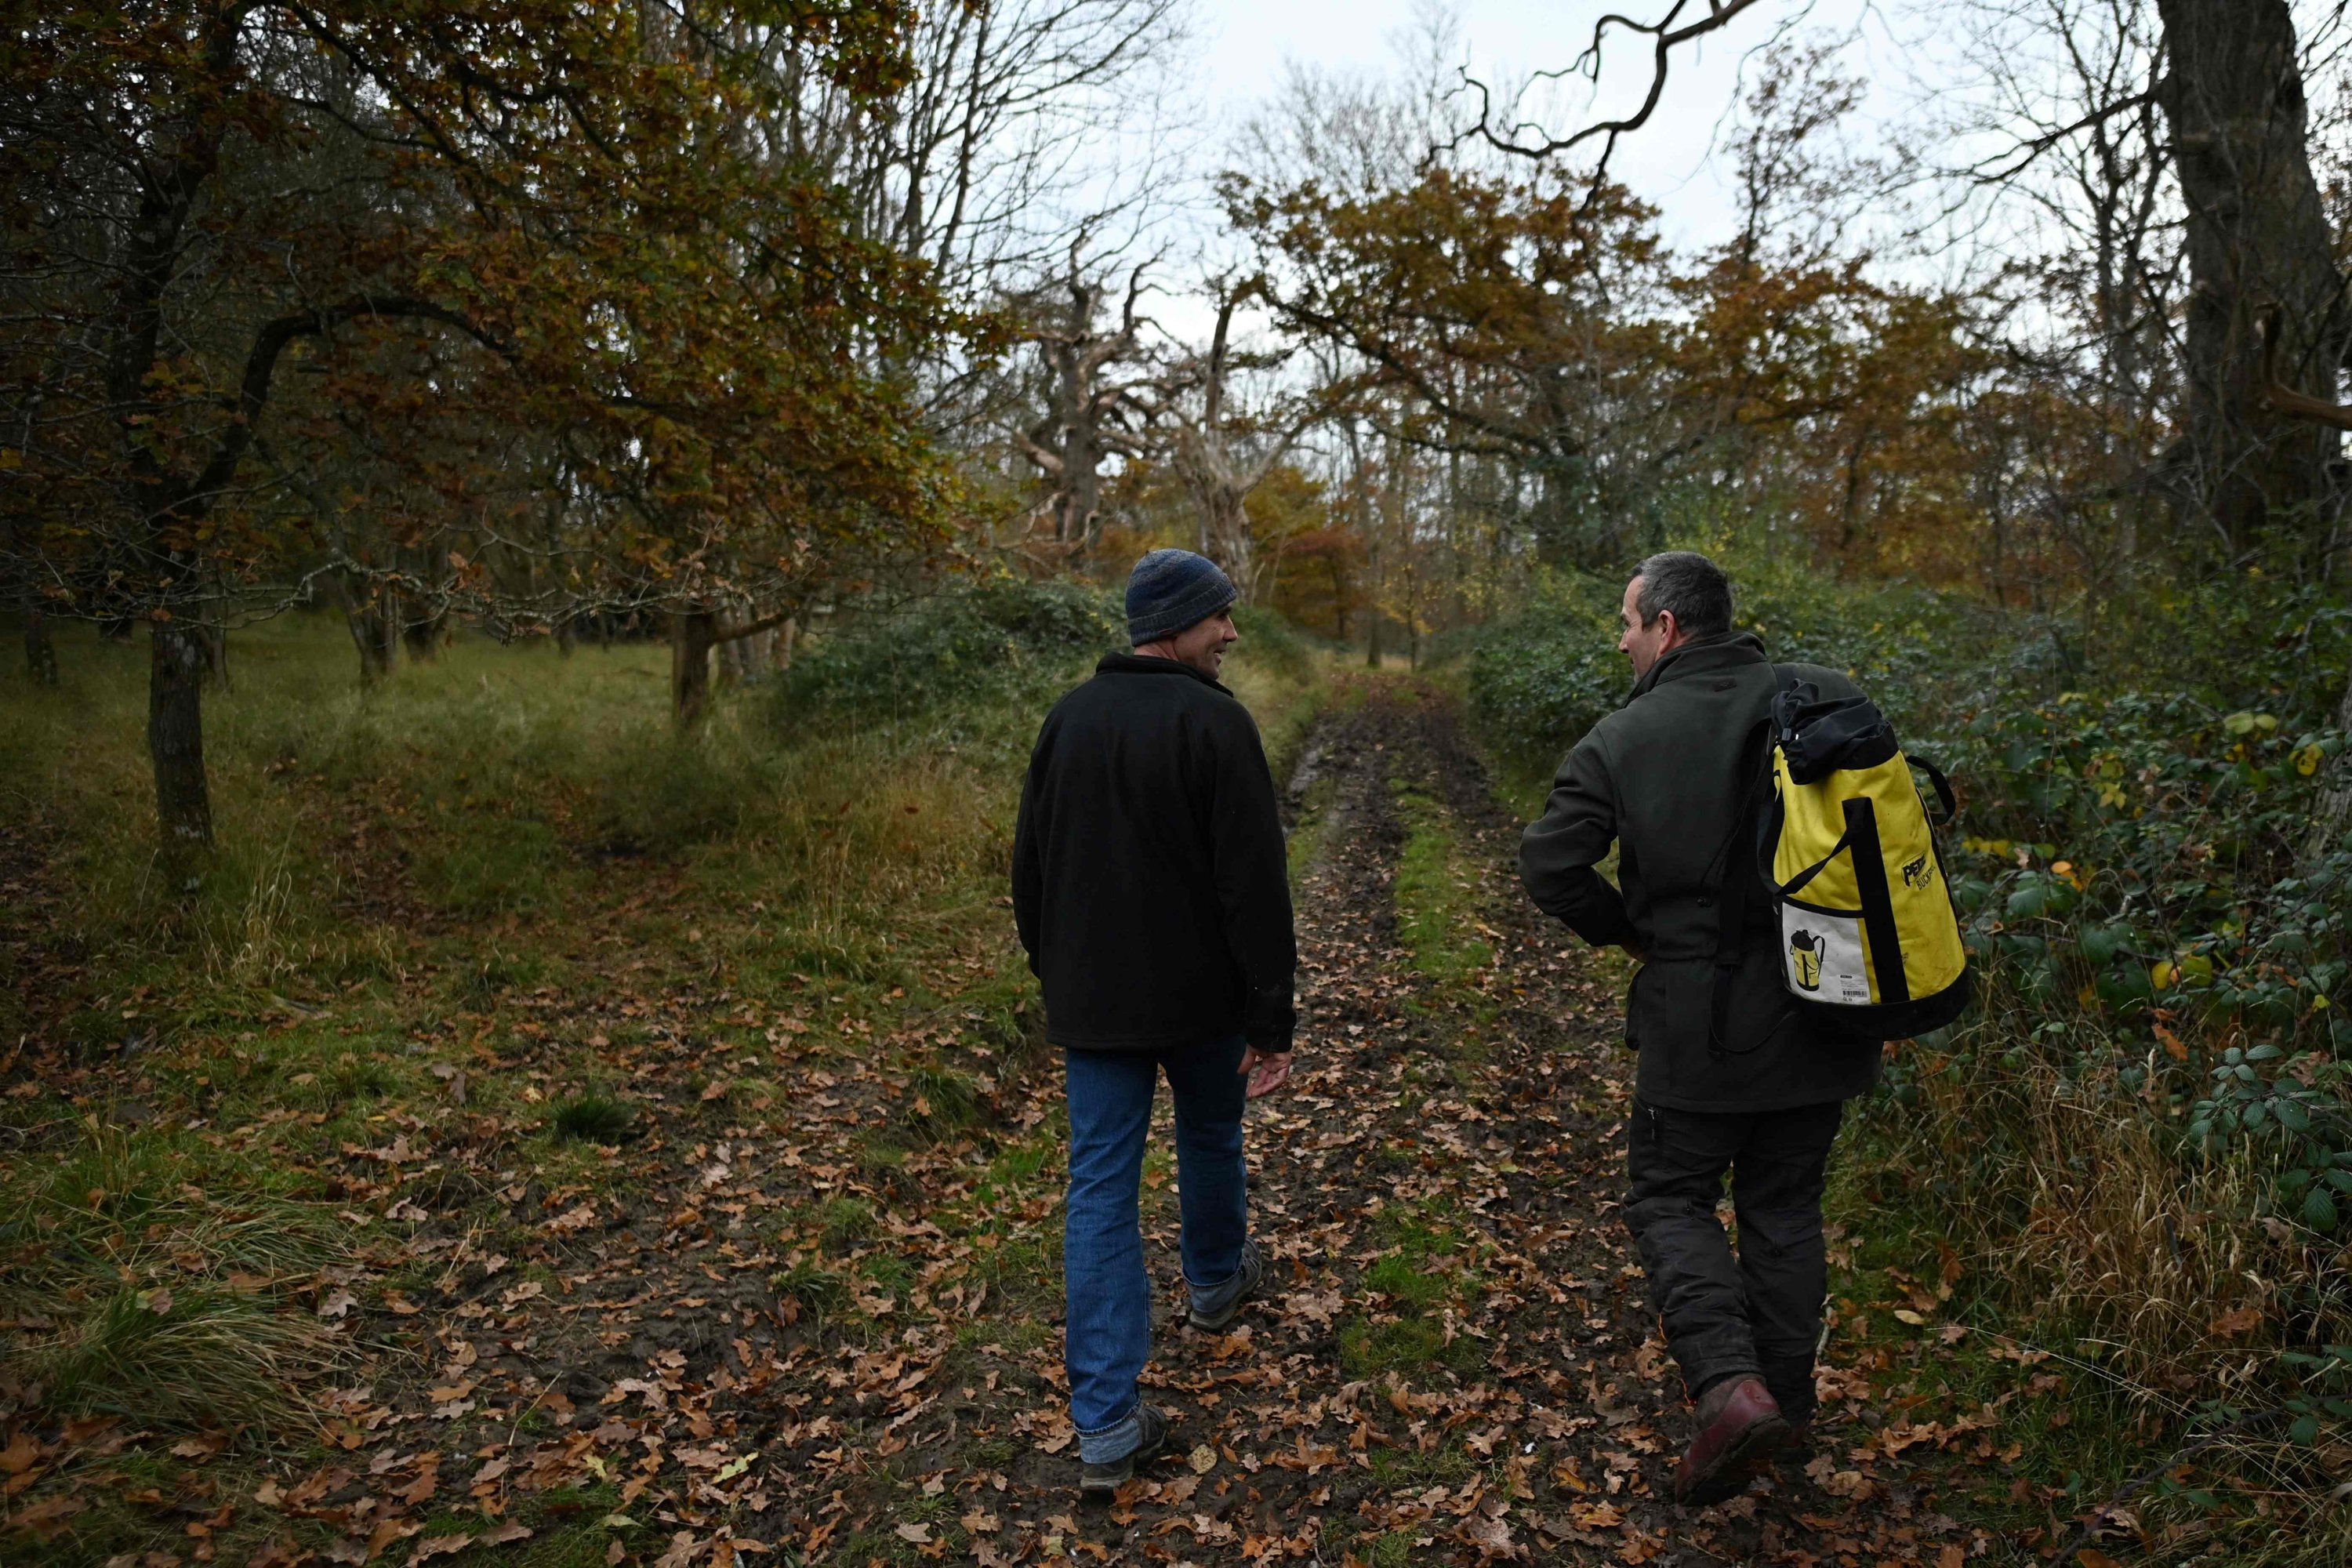 Bee conservationist Filipe Salbany (L) and Head Forester Nick Baimbridge walk through the Low Park on the Blenheim Estate in Oxfordshire, U.K., Nov. 20, 2021. (AFP Photo)